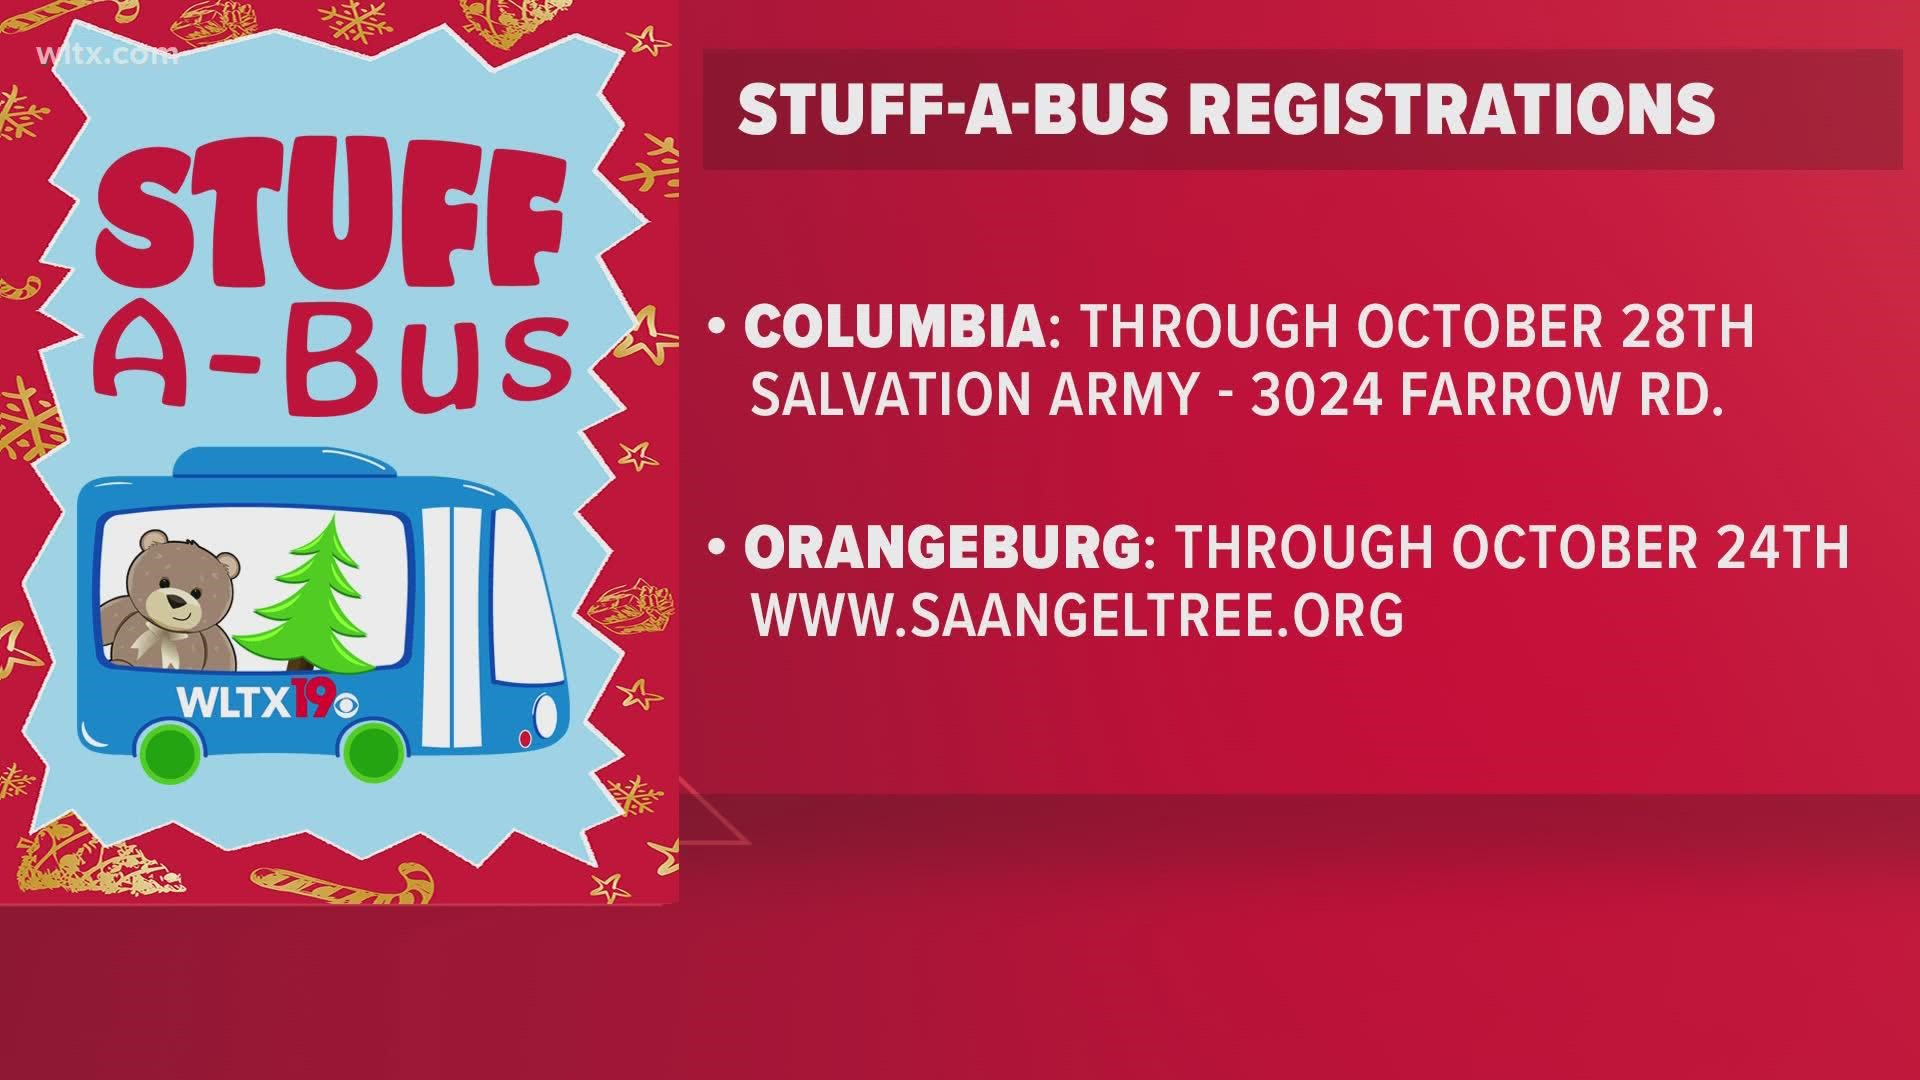 Think you'll need help this Christmas? Now is the time to register for assistance through Stuff-A-Bus.